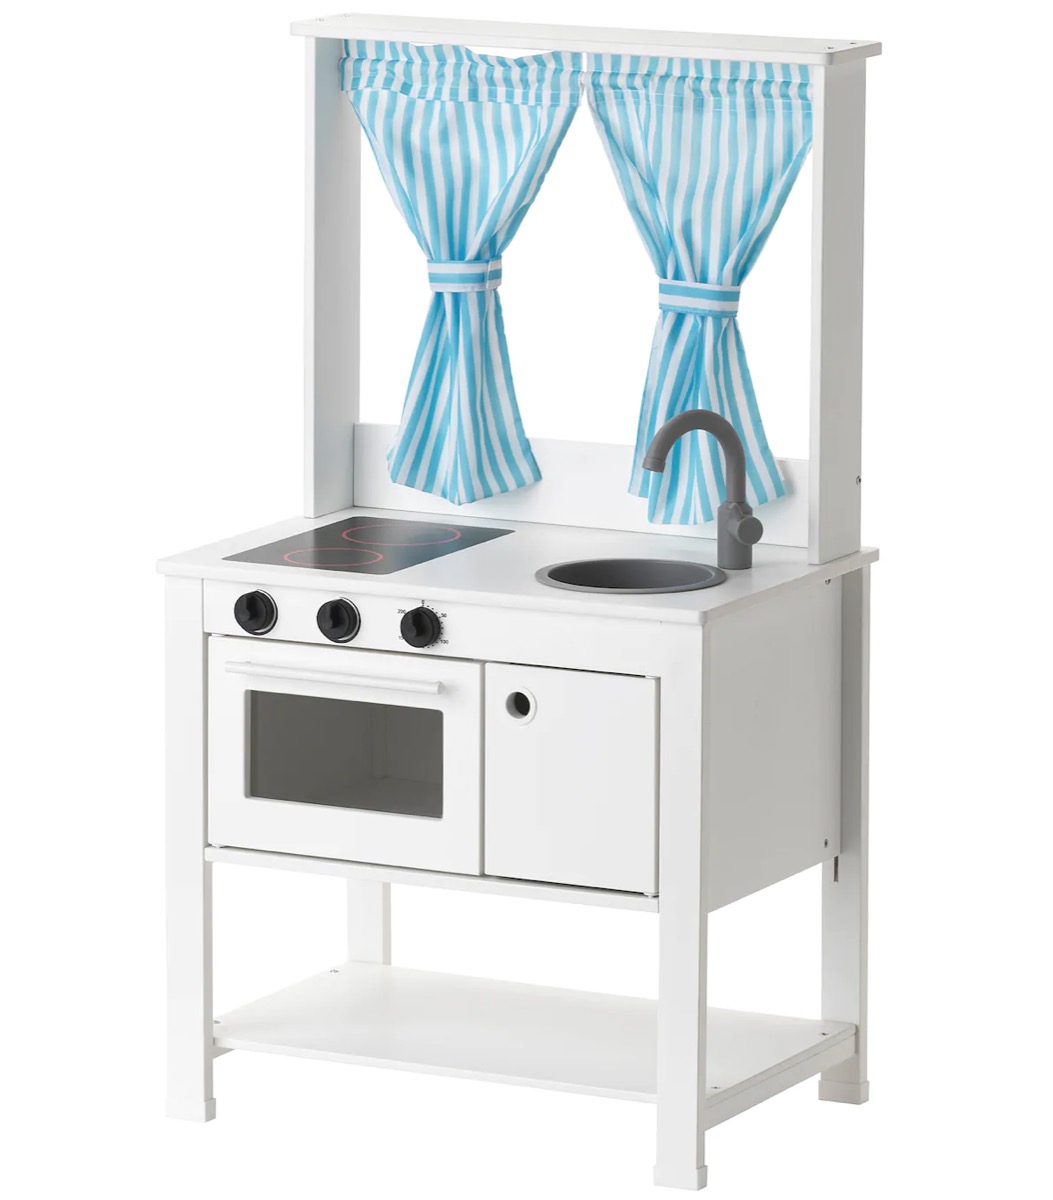 white kids play kitchen with blue and white striped curtains